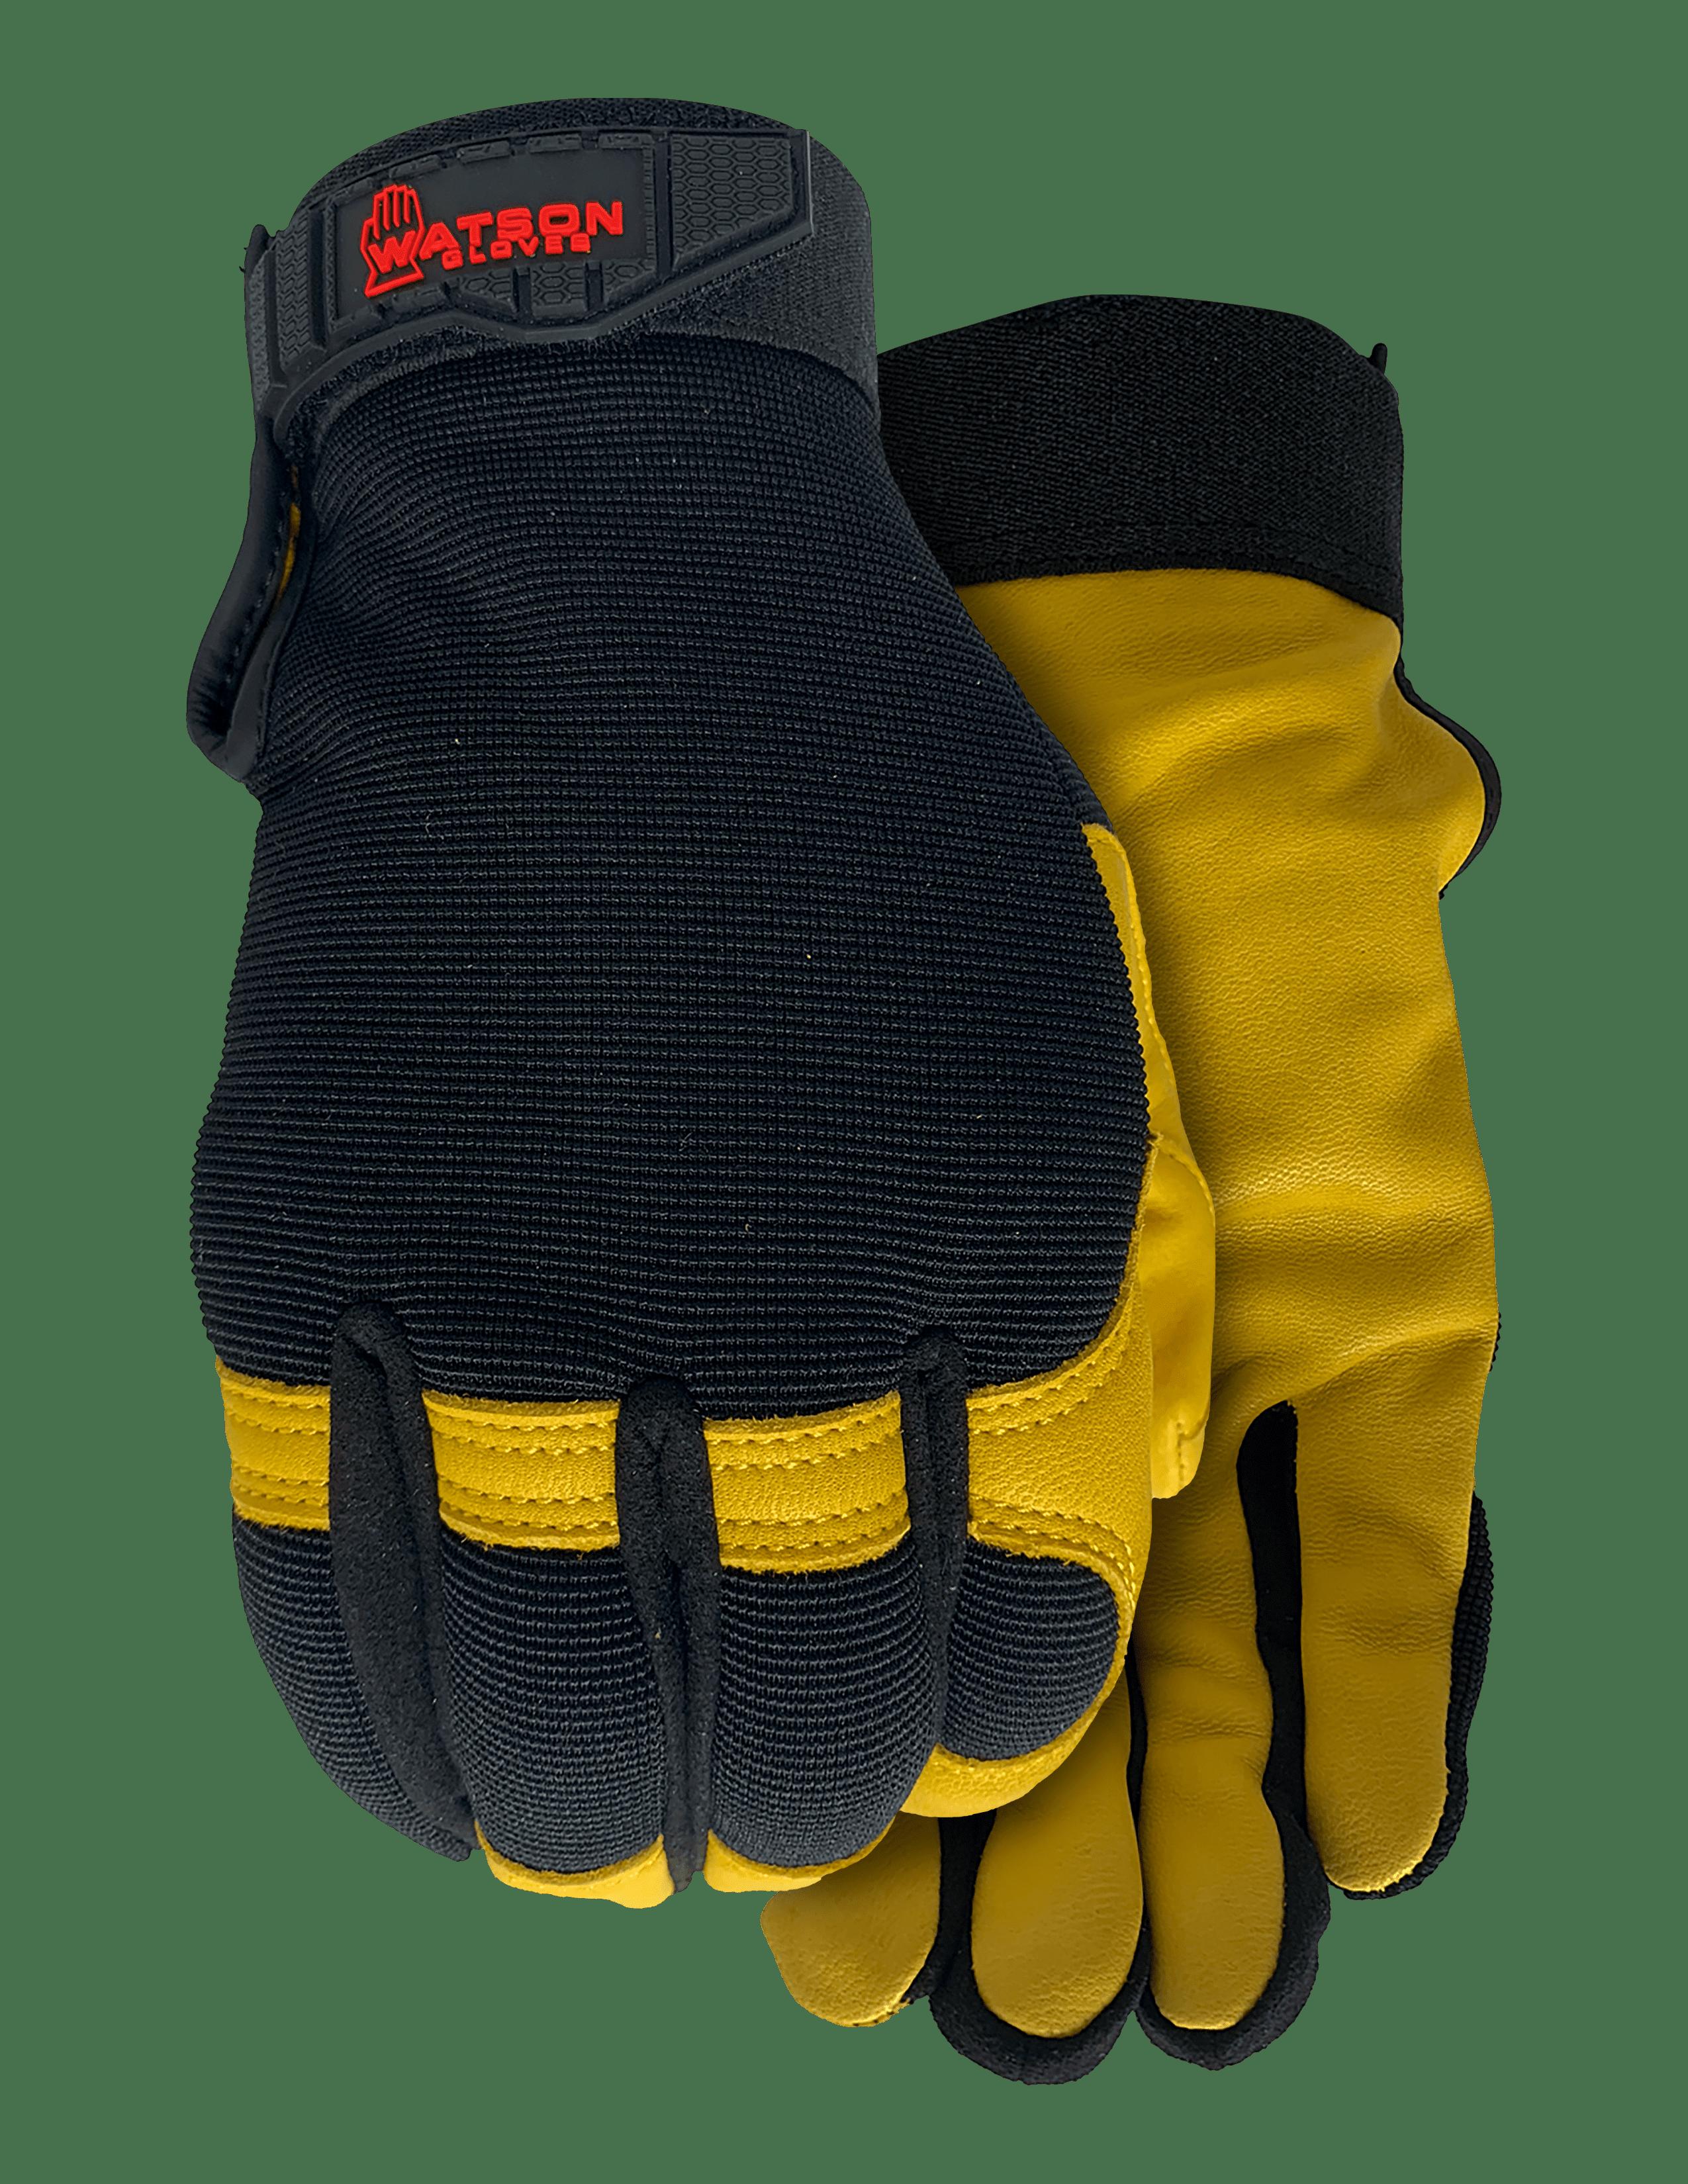 Garden Supplies Tools and Gloves Flex Time - Large